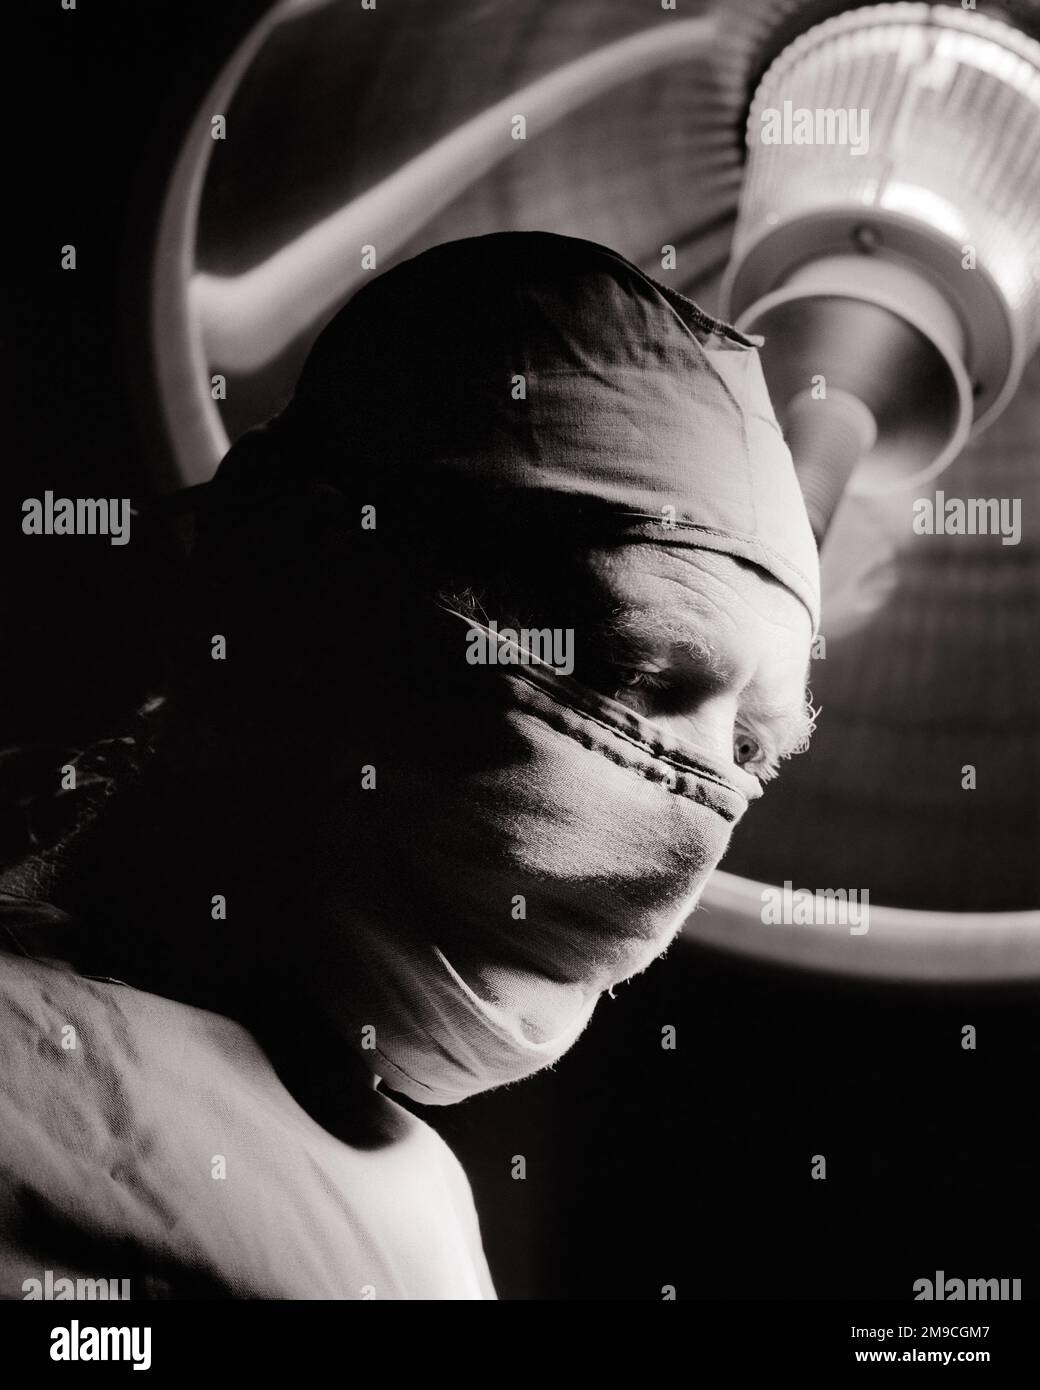 1970s MAN HOSPITAL SURGEON WEARING STERILE OPERATING ROOM CAP GOWN MASK UNDER AN O.R. LIGHT - m9091 HAR001 HARS MIDDLE-AGED B&W MIDDLE-AGED MAN HEALTHCARE SURGERY SKILL OCCUPATION SKILLS OPERATING HEAD AND SHOULDERS PROVIDER PROVIDERS PRACTITIONERS STERILE HEALING SURGICAL KNOWLEDGE PHYSICIANS POWERFUL SURGEONS OPERATING ROOM HEALTH CARE AUTHORITY OCCUPATIONS SURGEON HEALER CONCEPTUAL OPERATION PHYSICIAN PRACTITIONER SCRUBS SINCERE SOLEMN FOCUSED INTENSE O.R. PROFESSIONALS BLACK AND WHITE CAREFUL CAUCASIAN ETHNICITY EARNEST HAR001 INTENT OLD FASHIONED Stock Photo